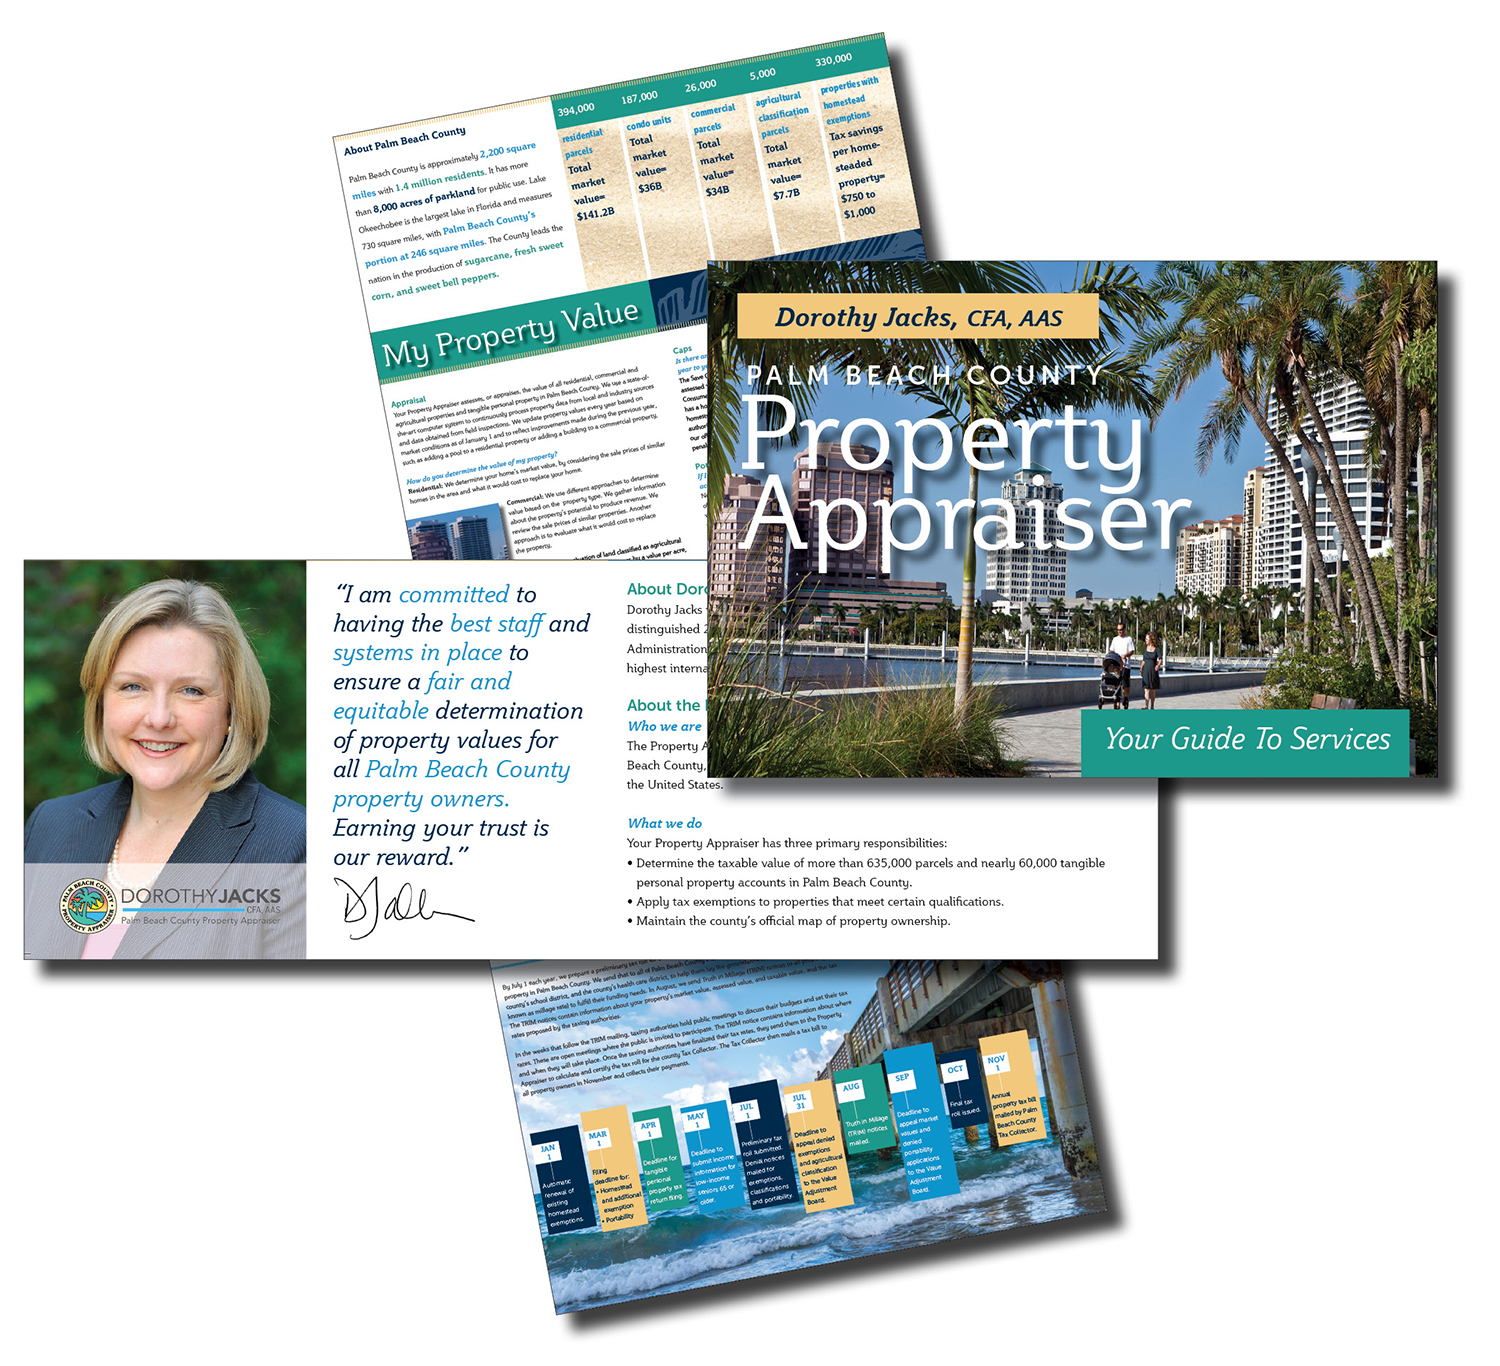 Palm Beach County Property Appraiser sweetboo